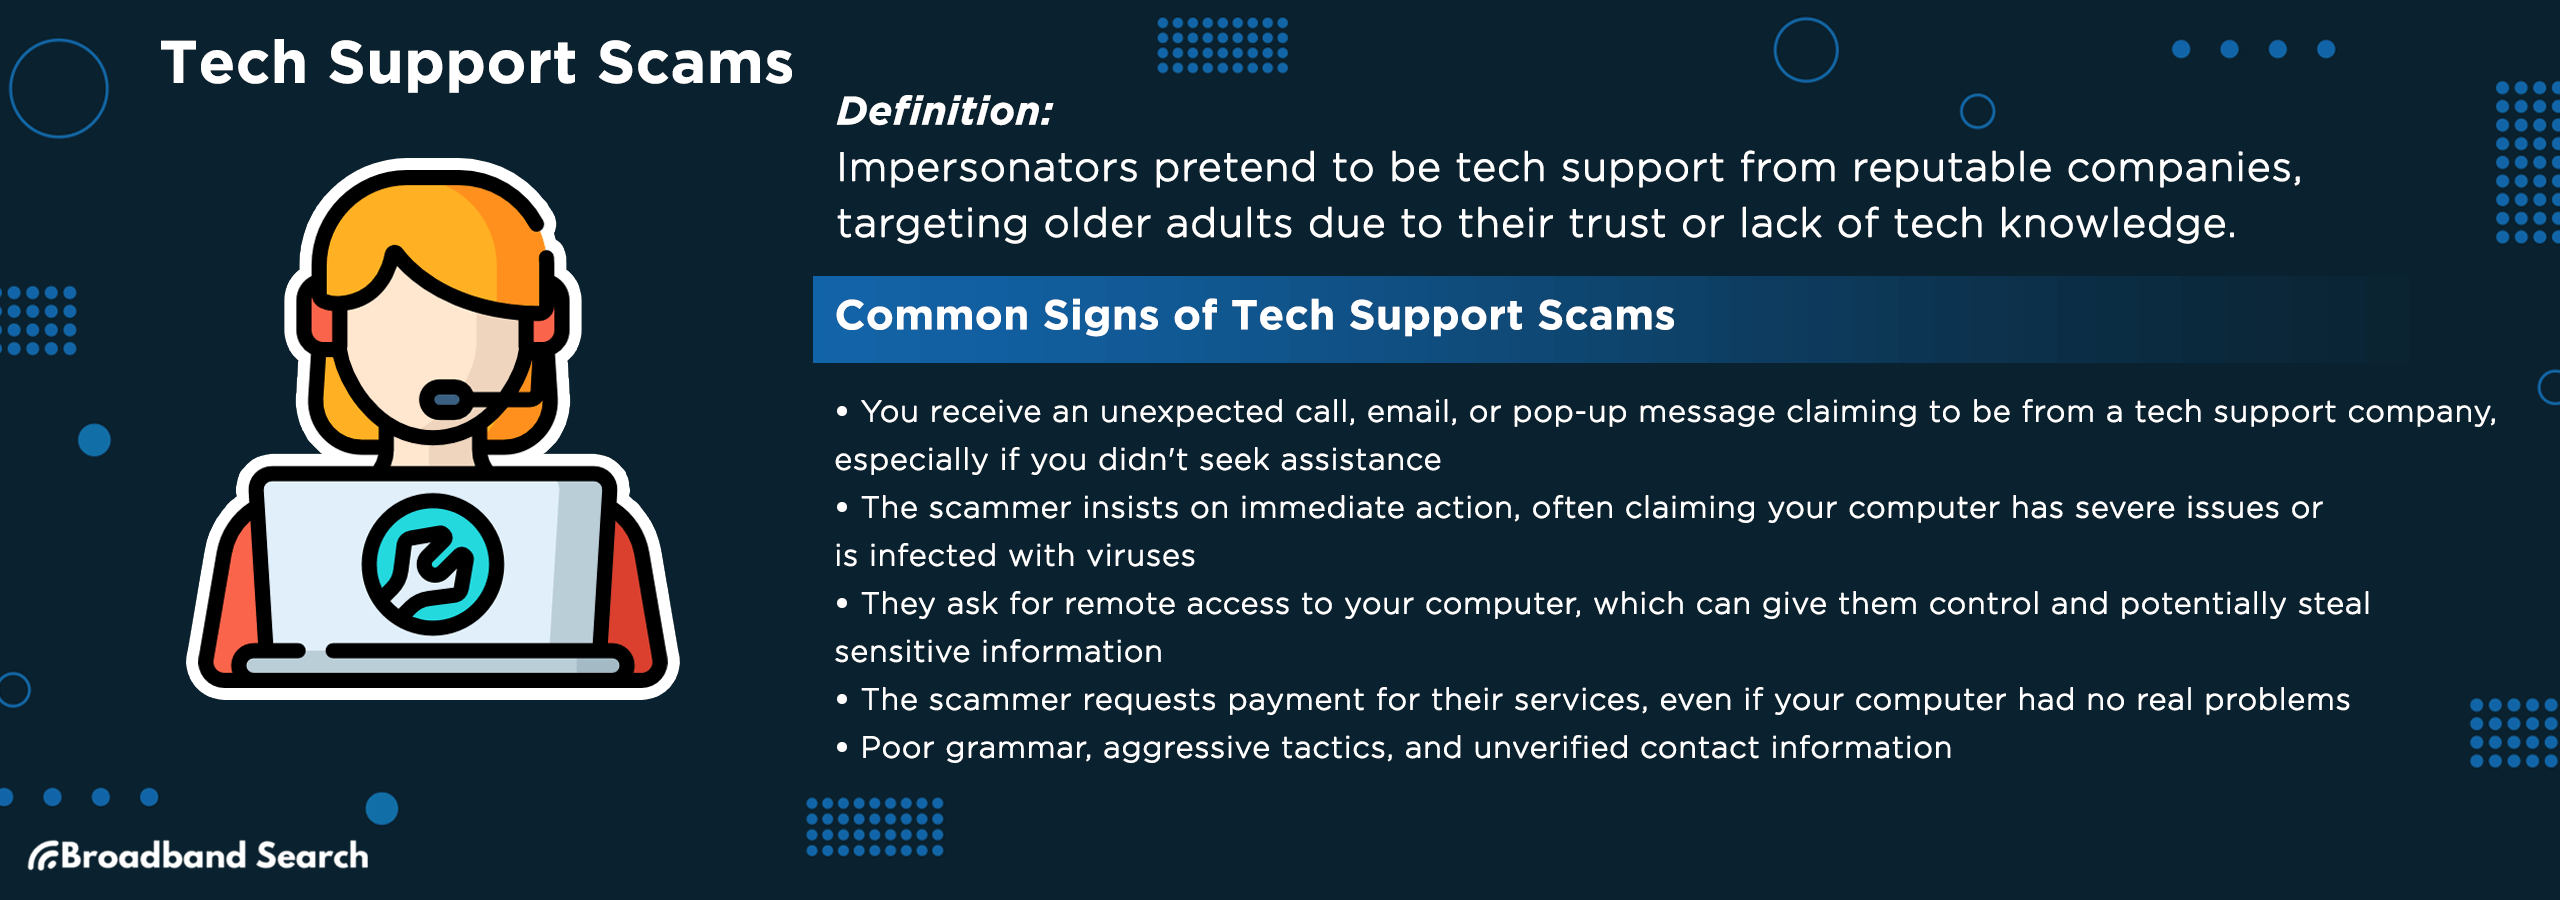 Definition and signs of tech support scams